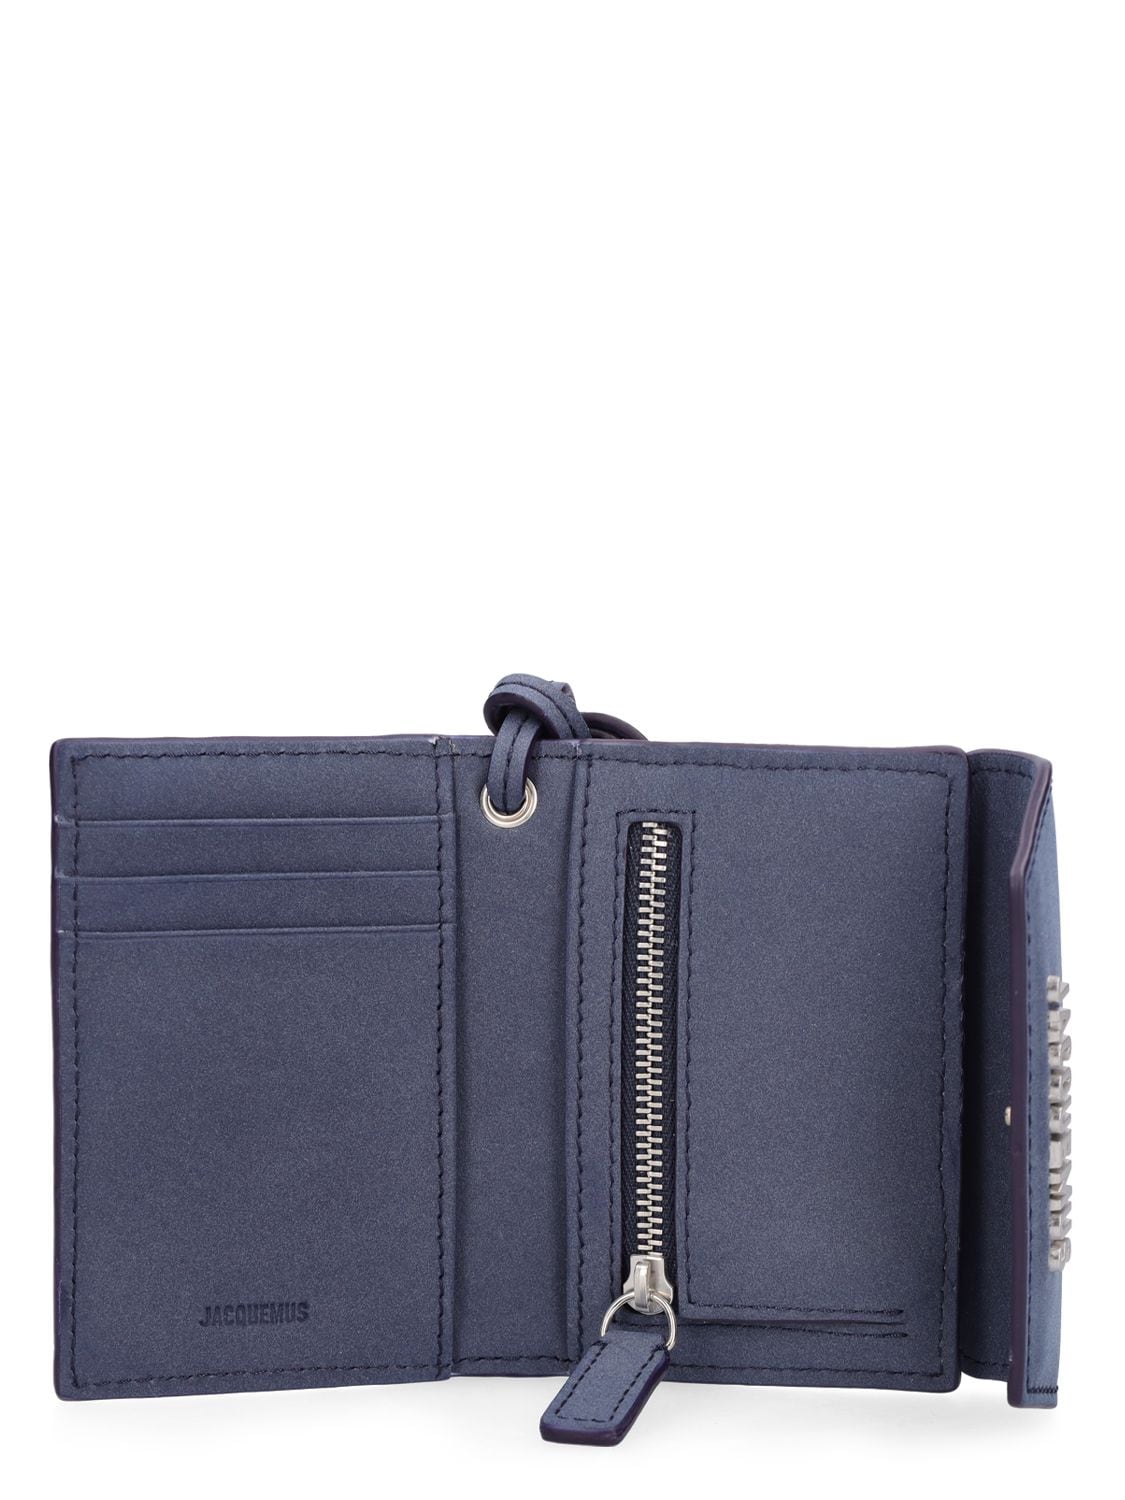 Le Porte Leather Wallet With Strap in Blue - Jacquemus